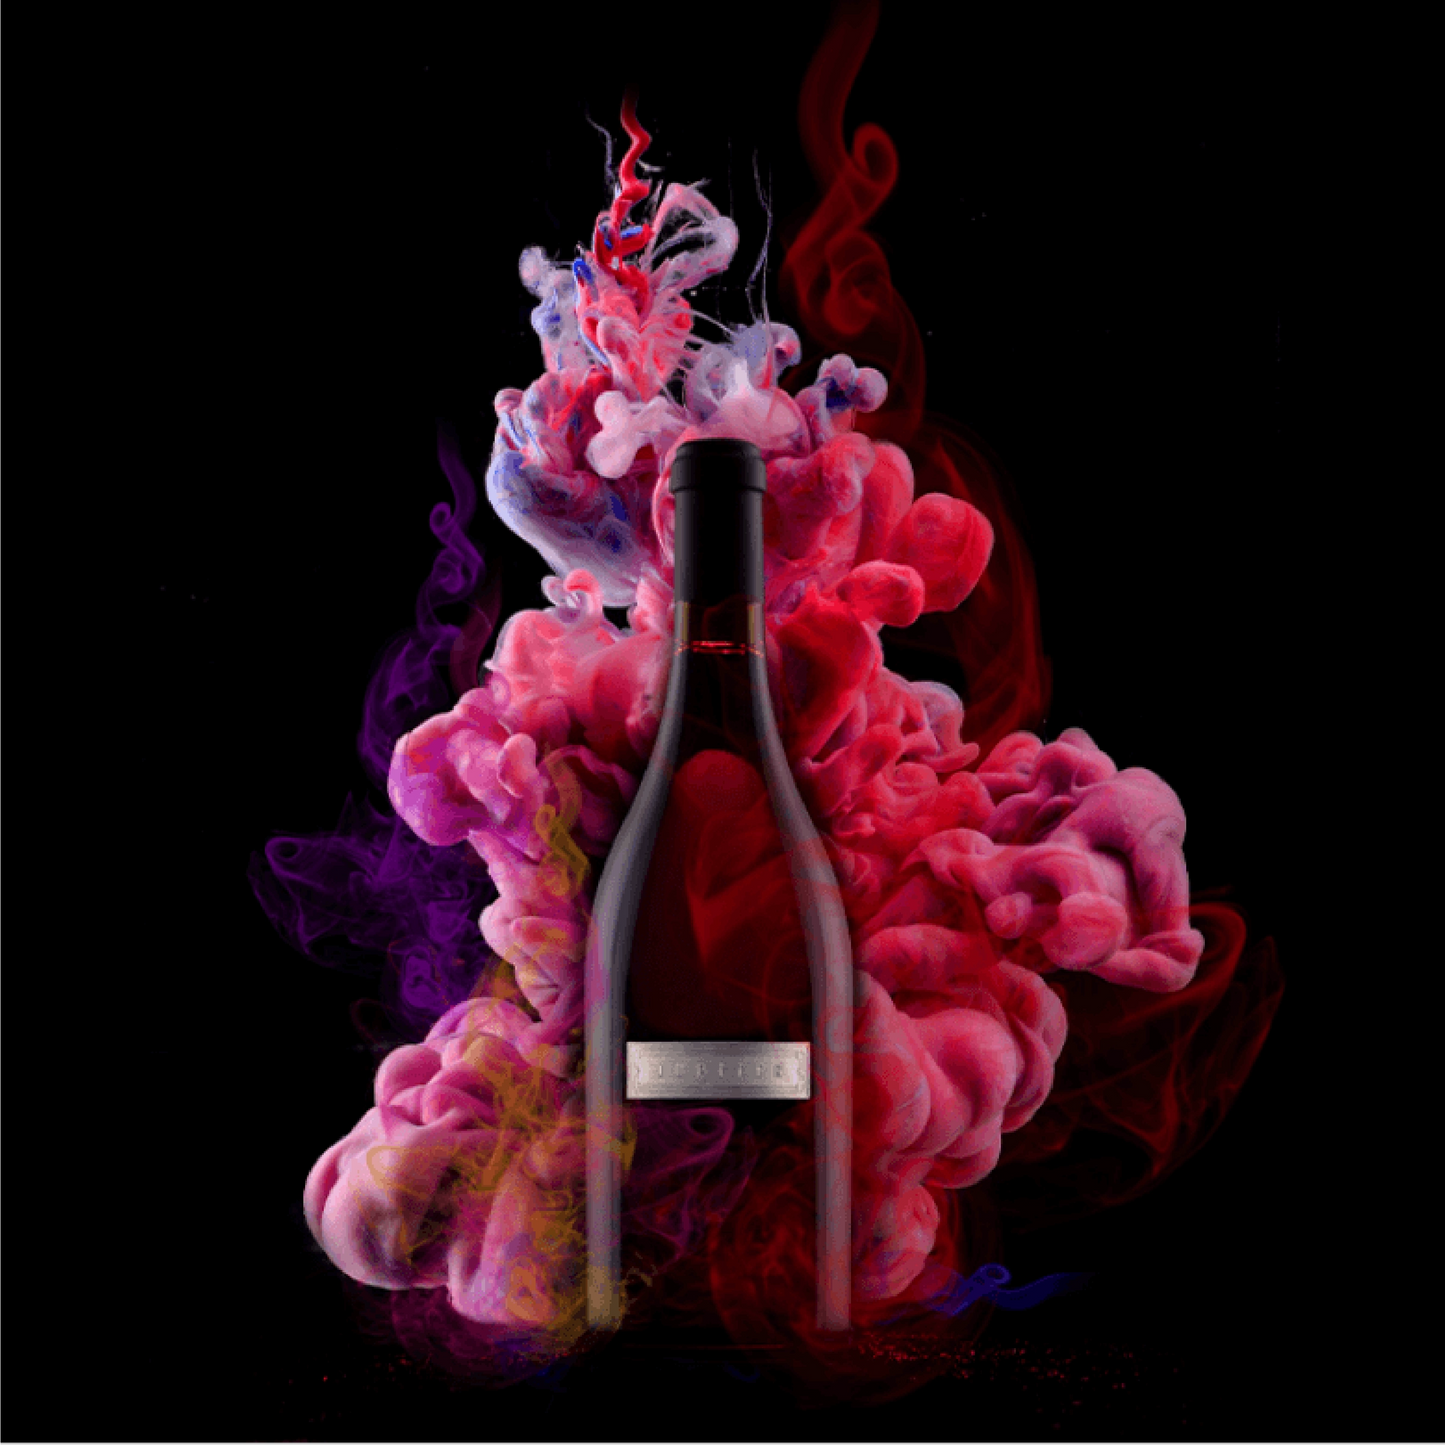 Wines from another World - Code 01. Júpiter Tinto 2015